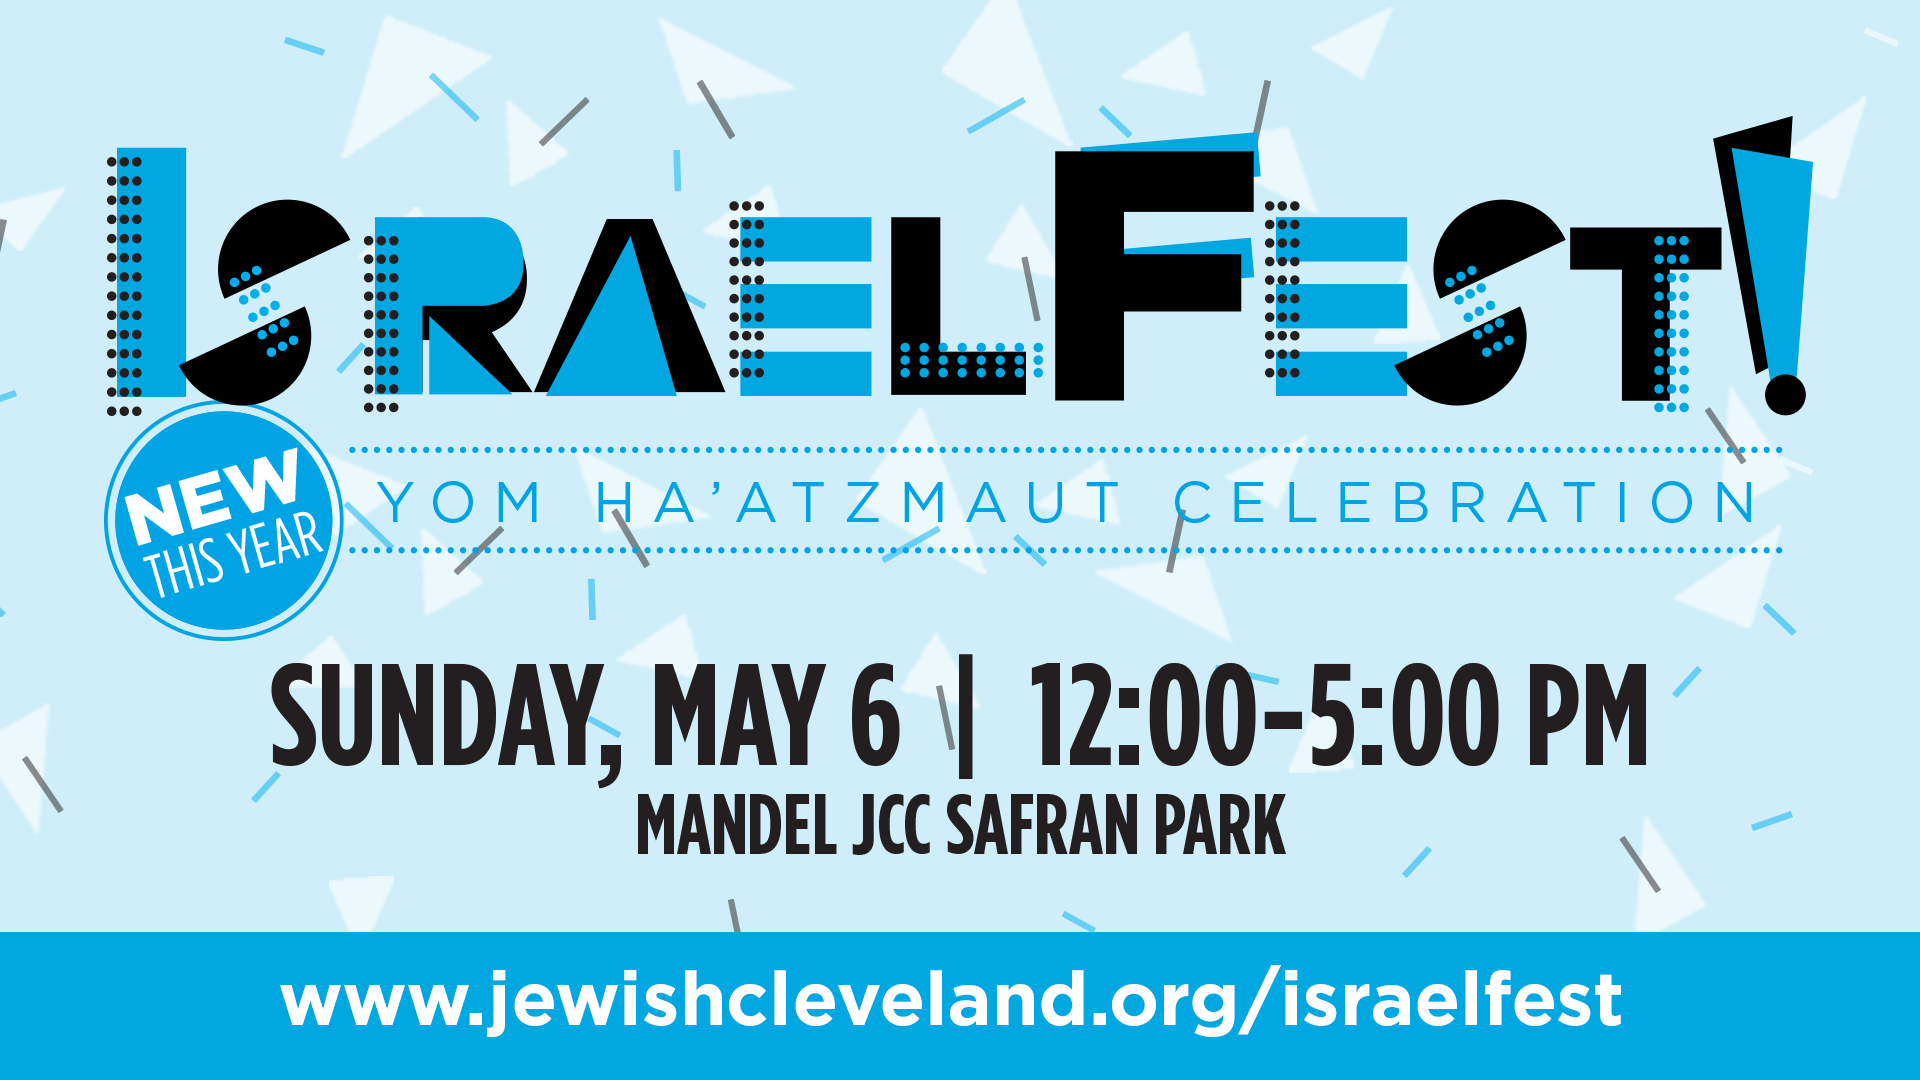 What to Expect at IsraelFest! on May 6